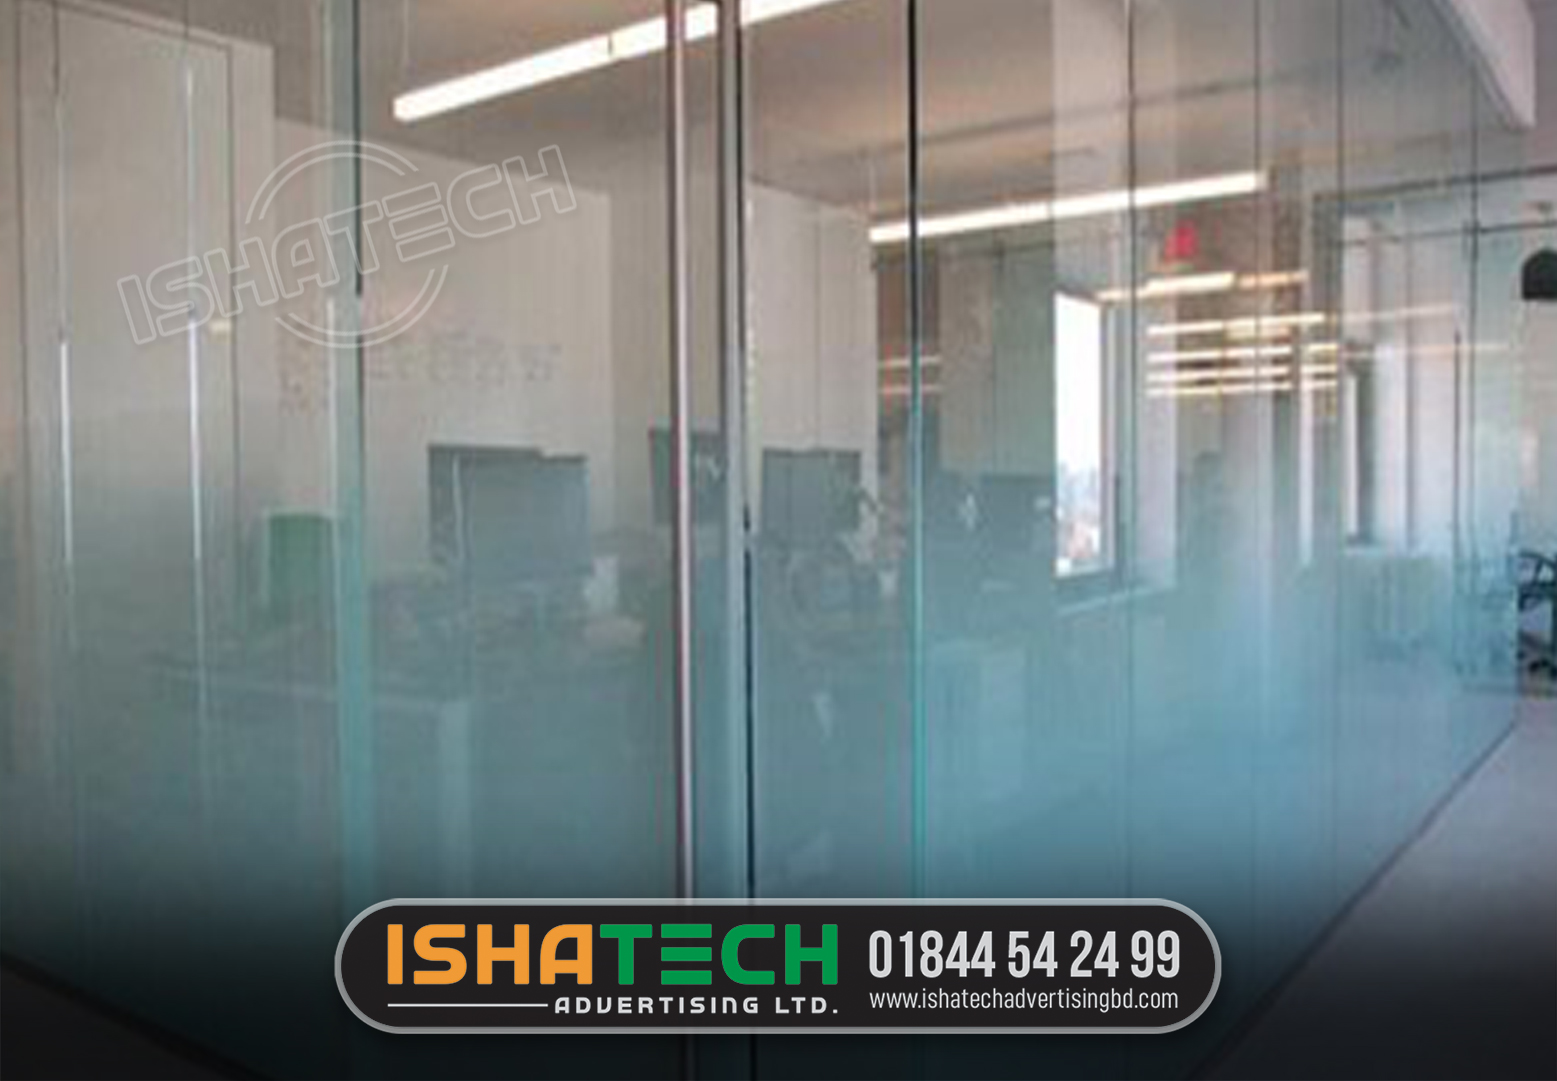 Office & Restaurant Glass Clear Frosted Sticker Print. Frosted Glass Sticker Best Price in Bangladesh frosted stickers for glass doors frosted sticker paper frosted sticker for window frosted sticker near me frosted sticker price frosted sticker design frosted sticker supplier Buy Glass Sticker Products Online in Bangladesh Frosted Glass Sticker Best Price in Dhaka Frosted Glass Sticker Best Price in chittagong Glass Sticker Price in Bangladesh Thai Glass Sticker Price in Bangladesh Glass Sticker in BangladeshFrosted Glass paper price in chittagong Bangladesh Thai glass paper sticker price in chittagong Bangladesh 2023 Digital Waterproof Frosted Sticker for Glass Making Branding price in chittagong Bangladesh frosted sticker meaning frosted sticker price frosted sticker png frosted sticker price in chittagong paper frosted glass sticker price in bangladesh frosted sticker for glass frosted sticker texture frosted sticker price frosted sticker for glass frosted sticker for glass door frosted sticker design frosted sticker for window frosted sticker supplier frosted sticker paper frosted sticker for glass window frosted sticker supplier in dubai frosted sticker supplier philippines how to remove frosted sticker from glass 3m frosted sticker how to install frosted sticker on glass glass door frosted sticker design clear matte frosted sticker paper wilcon frosted sticker price in chittagong glass frosted sticker design frosted glass sticker price in chittagong frosted window sticker frosted price in chittagong glass sticker for window frosted glass sticker design frosted glass sticker bunnings frosted glass sticker singapore frosted glass sticker dubai frosted glass sticker near me frosted glass sticker supplier philippines frosted glass sticker ace hardware philippines Glass Door bd & pvc bathroom door price Glass Door Hinges - OEM for Famous Brand, Glass Door Glass Door Hinge Closer Steel Floor Spring Universal Hettich 180° Glass To Glass Hinges door hinges in Bangladesh Thai Aluminium Glass Design in Bangladesh Thai Glass Door & Partition Service in Dhaka Bangladesh Hanging glass door office Thai Glass